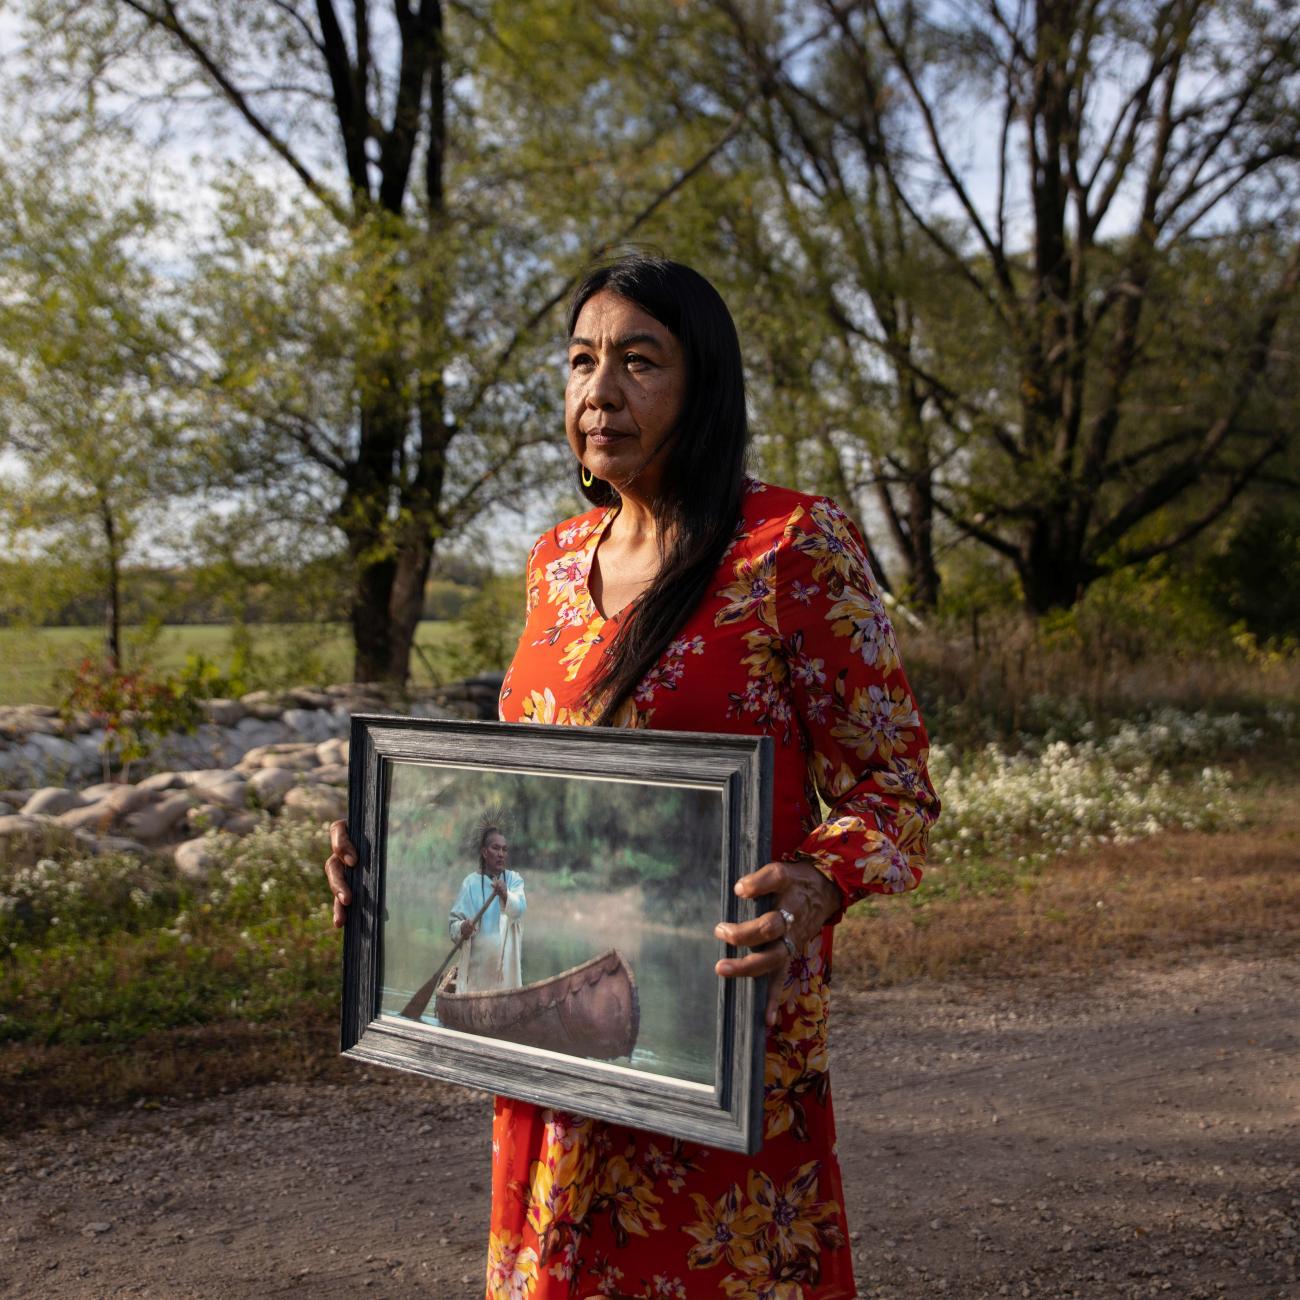 A woman holds a portrait of her late husband after he passed away due to a diabetes-related heart attack, in Red Wing, Minnesota, on September 29, 2021.